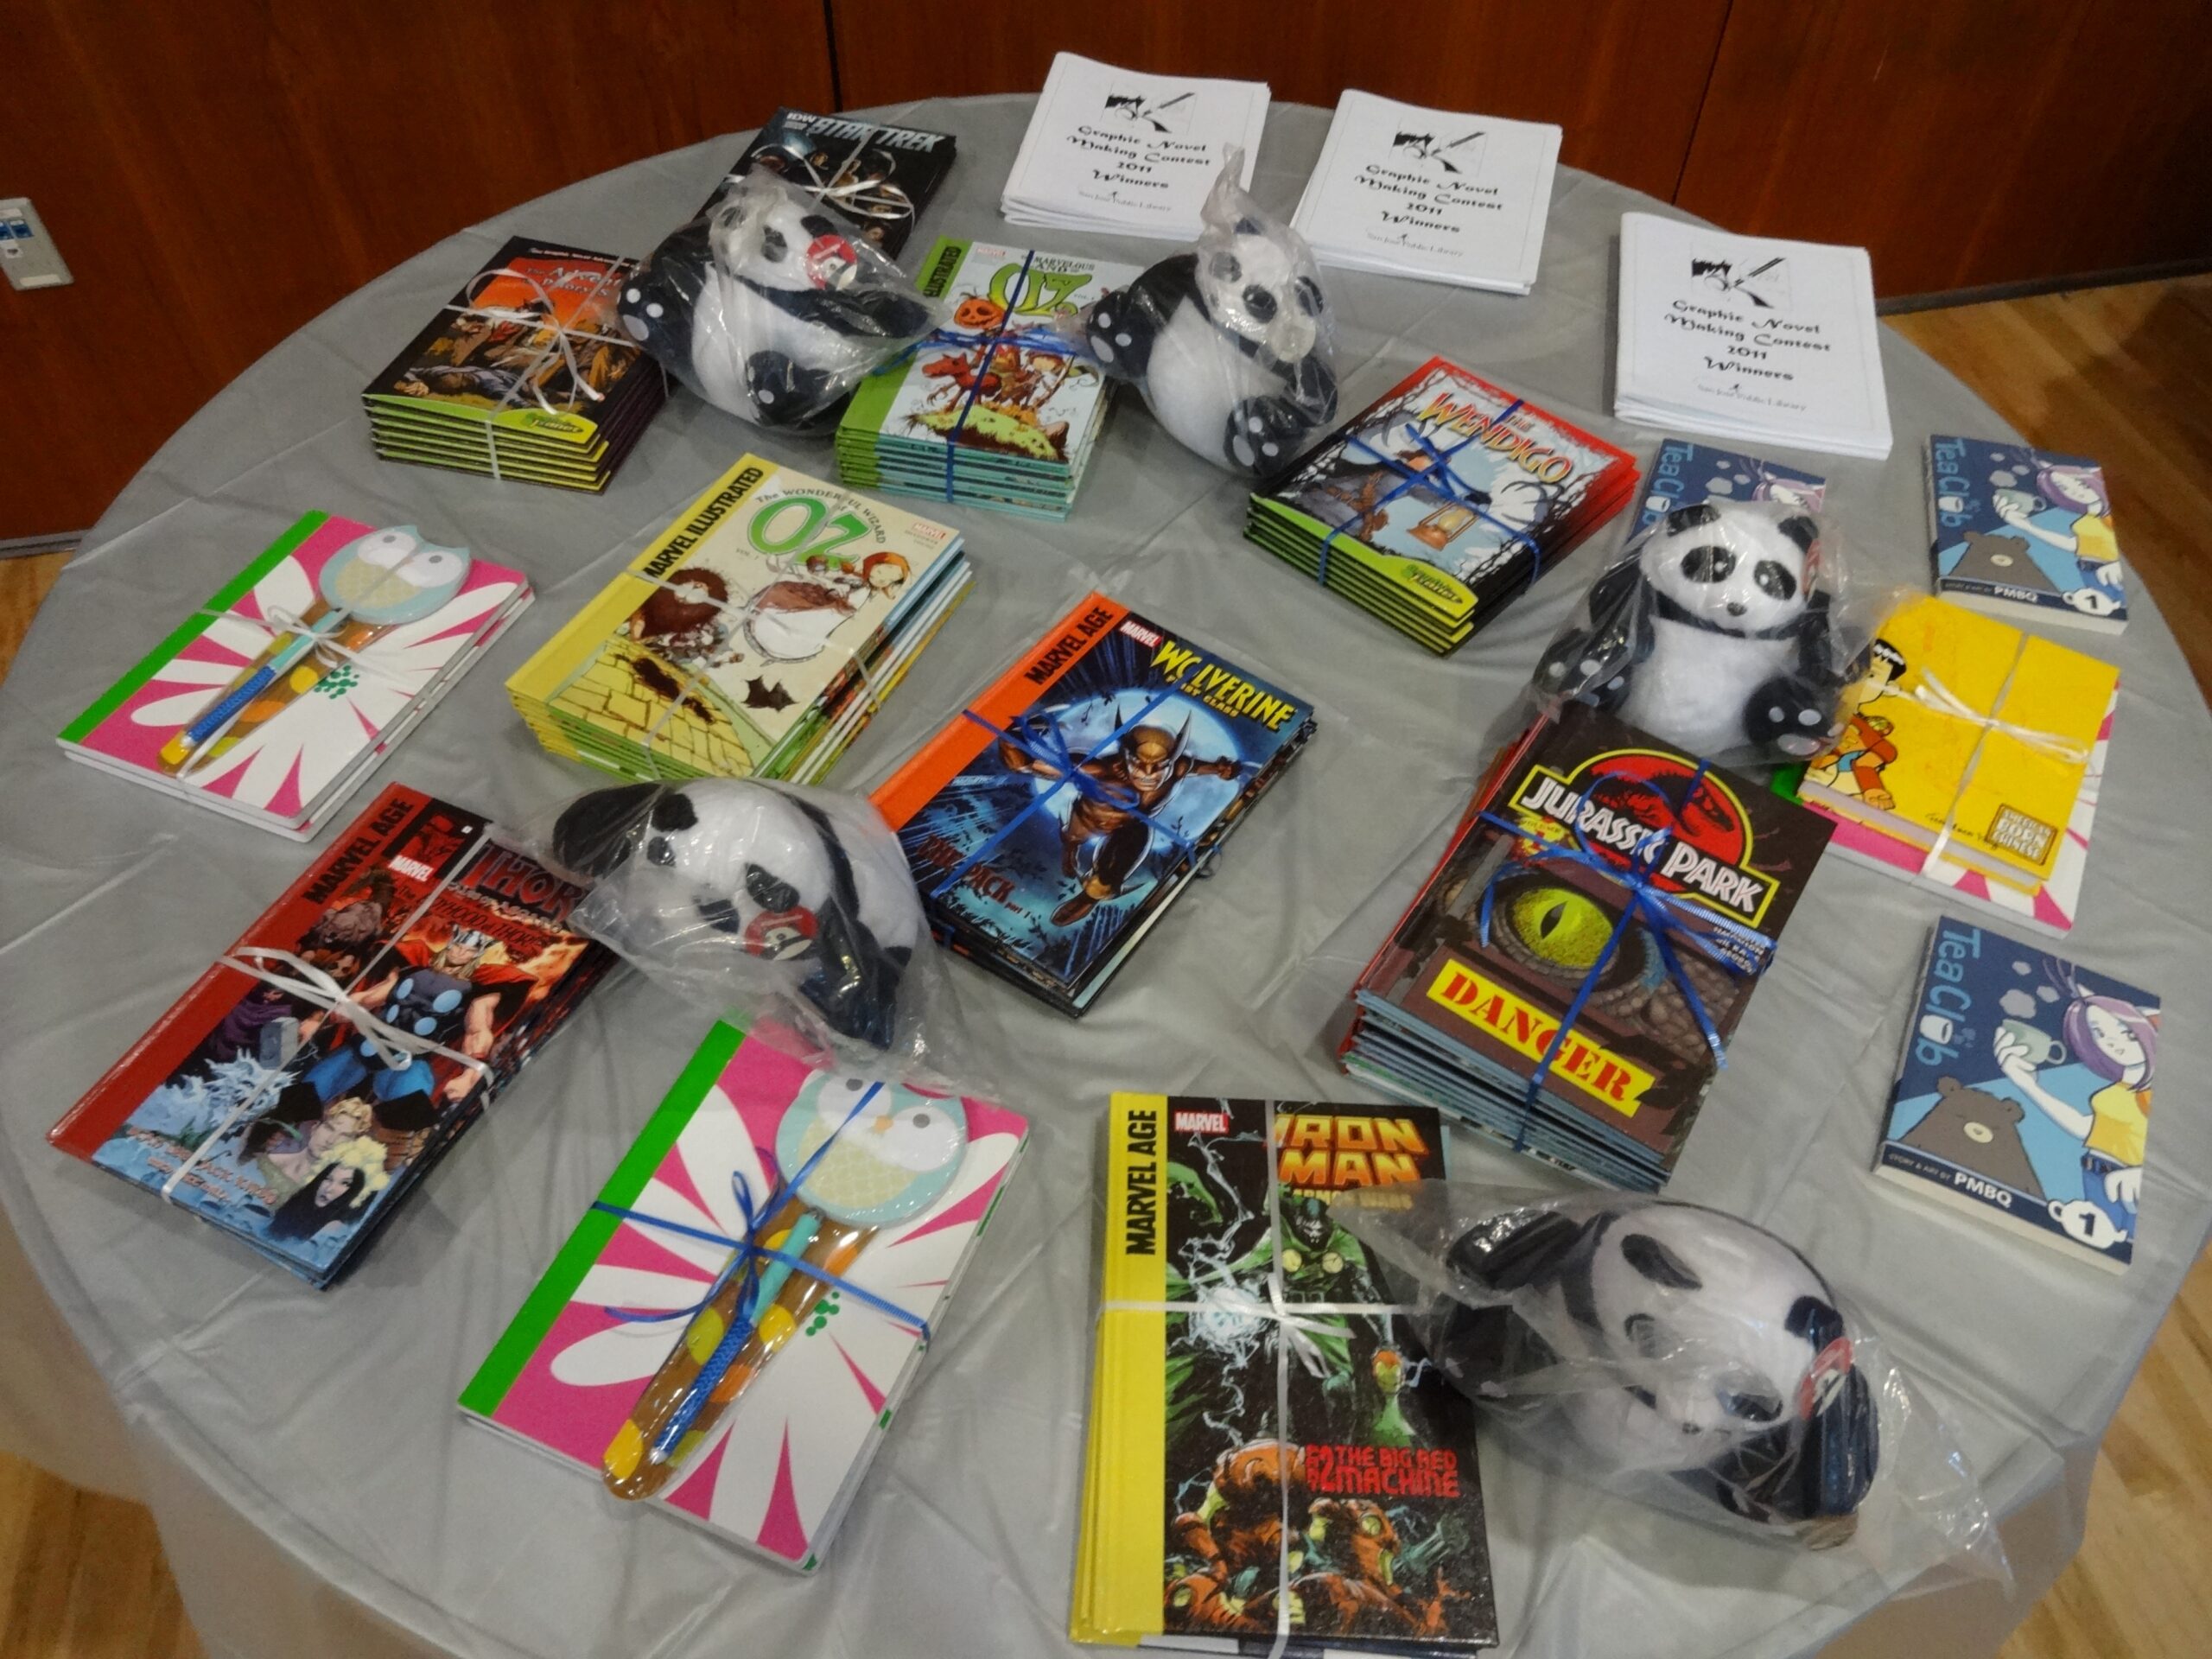 Table display of children's graphic novels